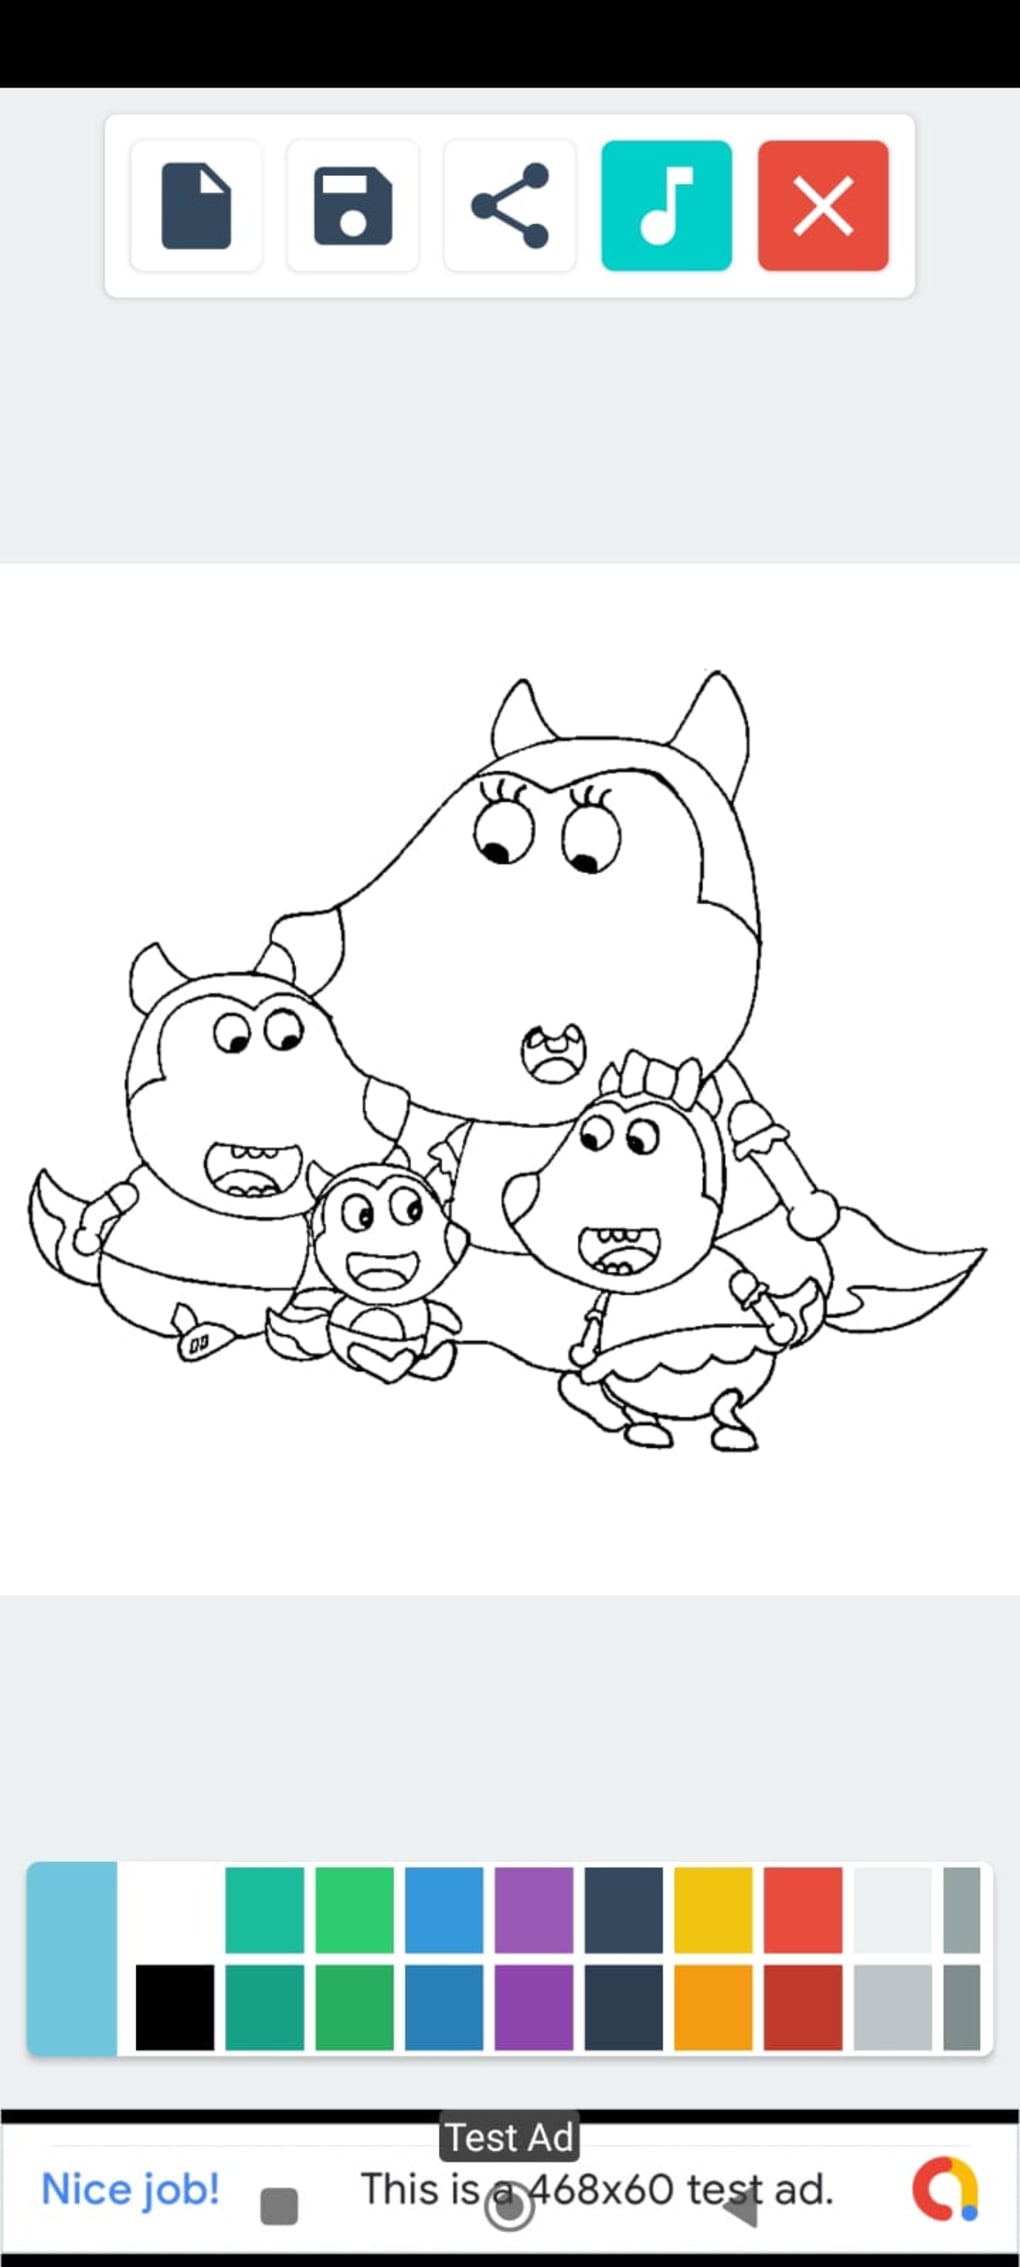 Wolfoo's Coloring Book - Apps on Google Play